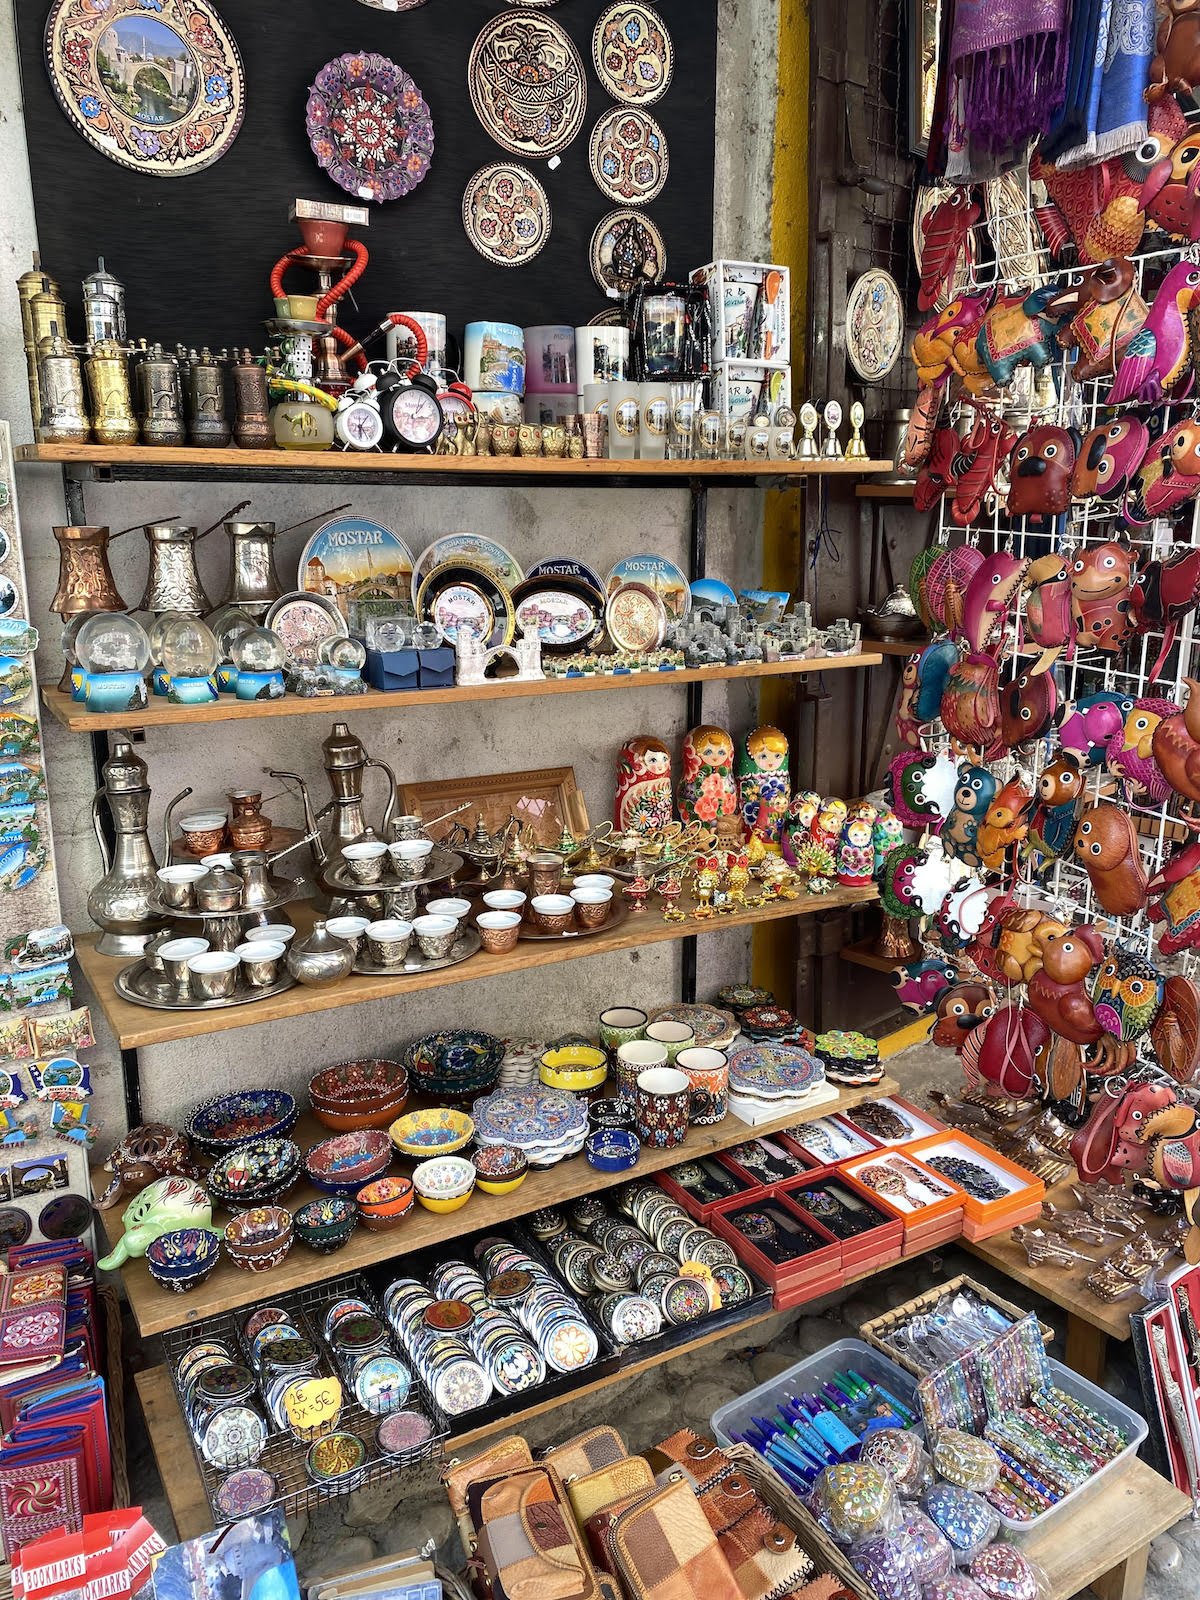 A shop offering a wide range of items on display, perfect for day trips from Dubrovnik to Mostar.